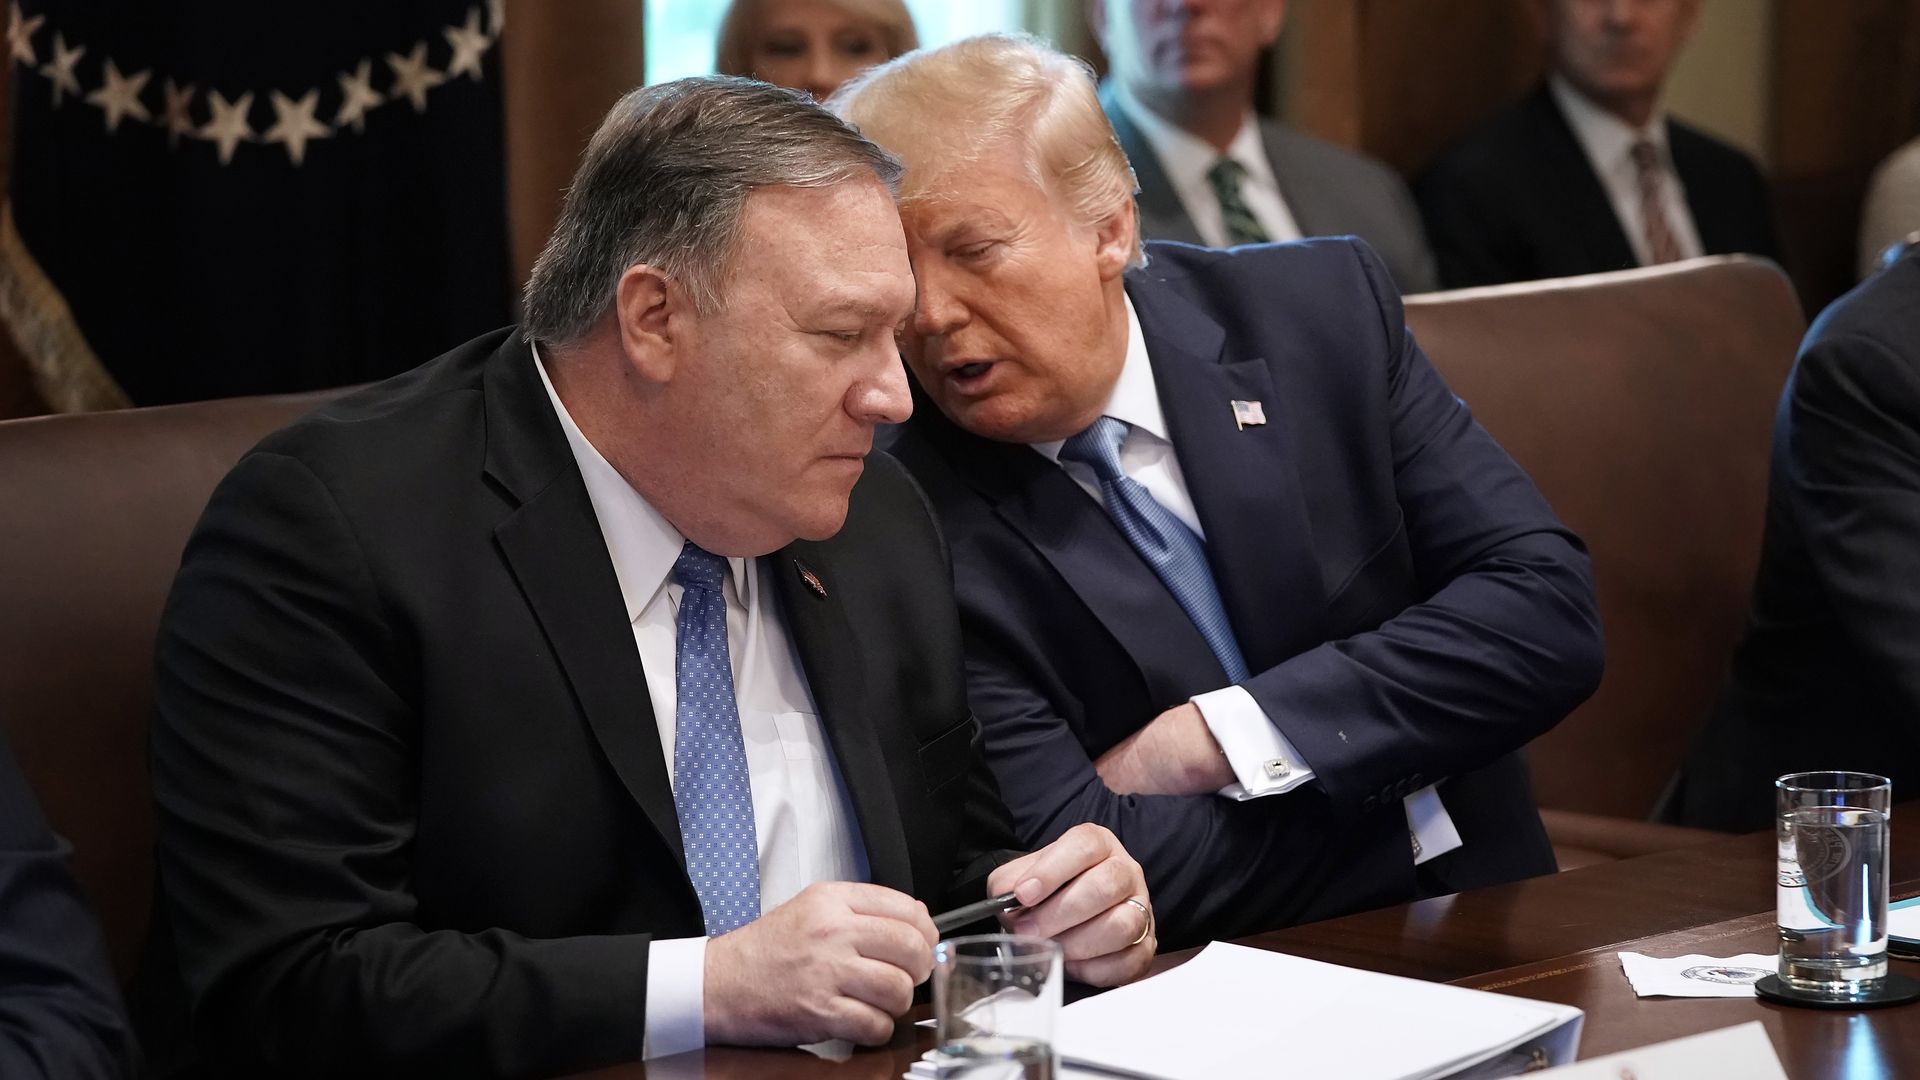 President Trump speaking with Sec. of State Mike Pompeo